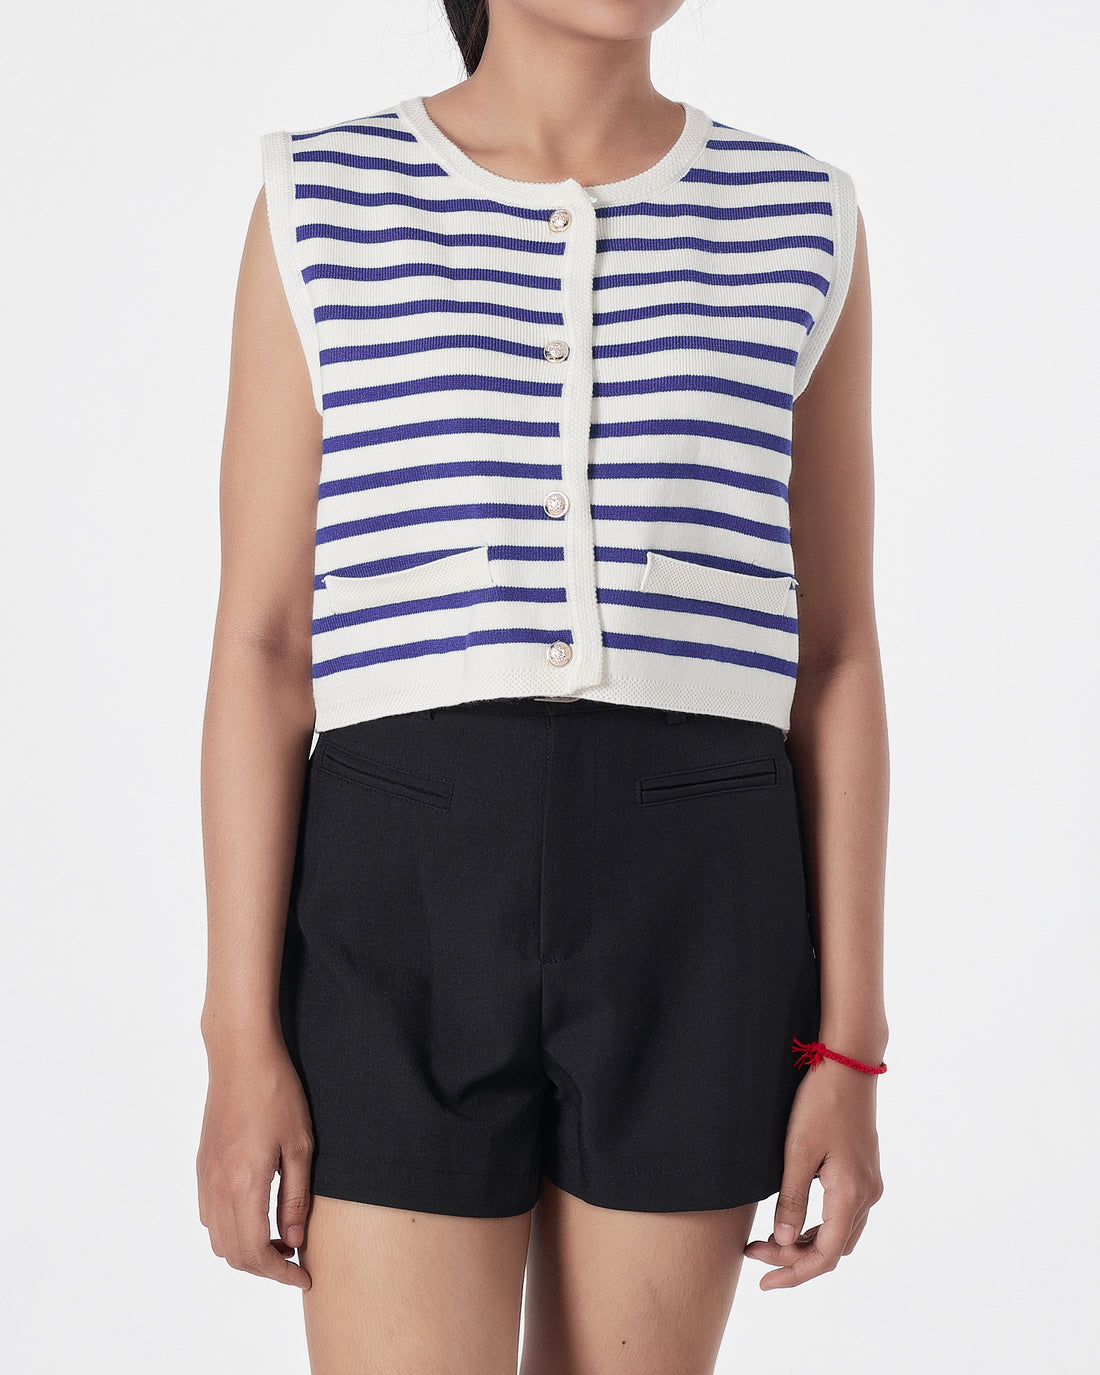 Striped Lady Front Button Blue Crop Top 15.90